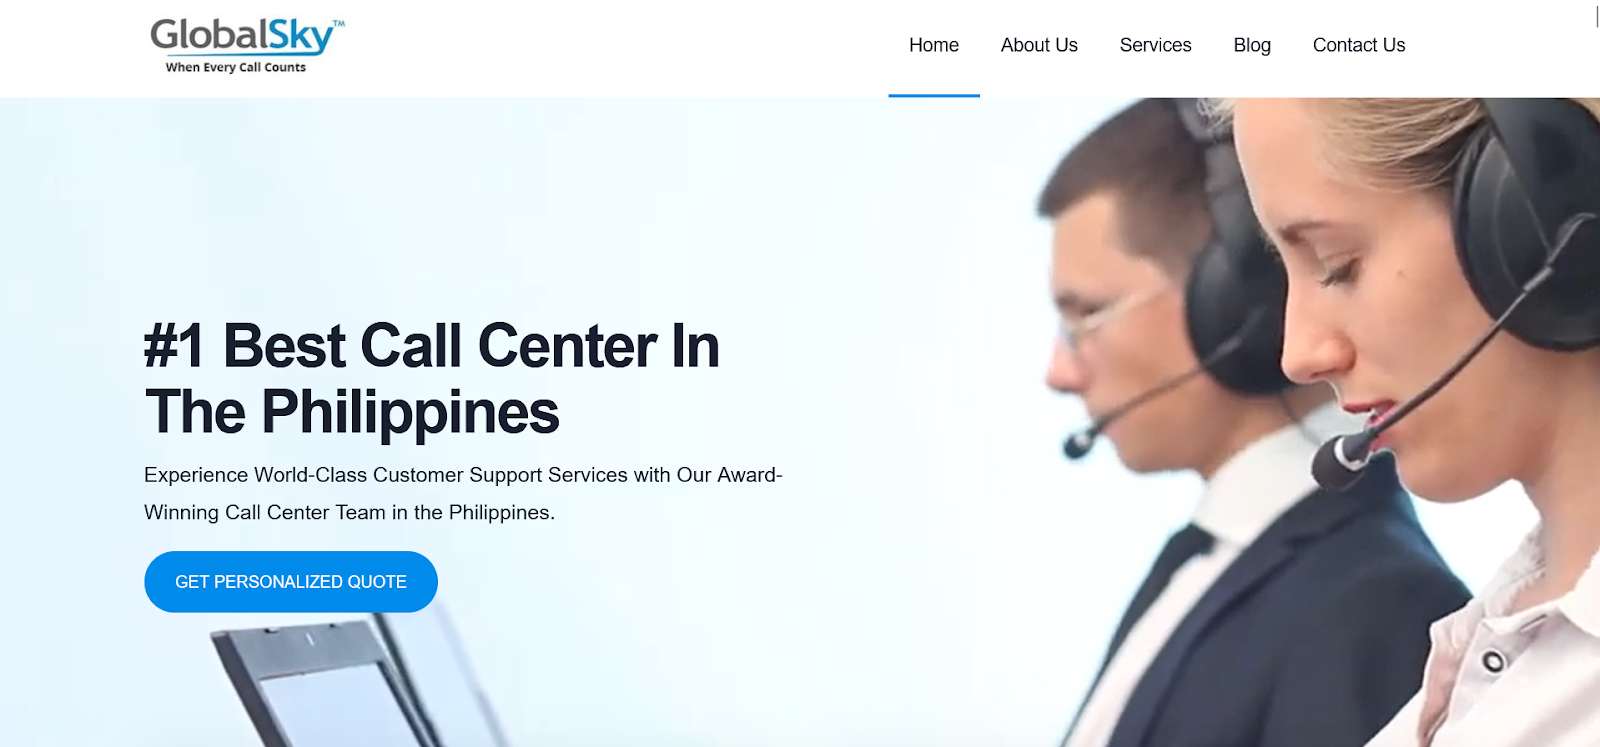 GlobalSky Call Center - Back Office Outsourcing Companies